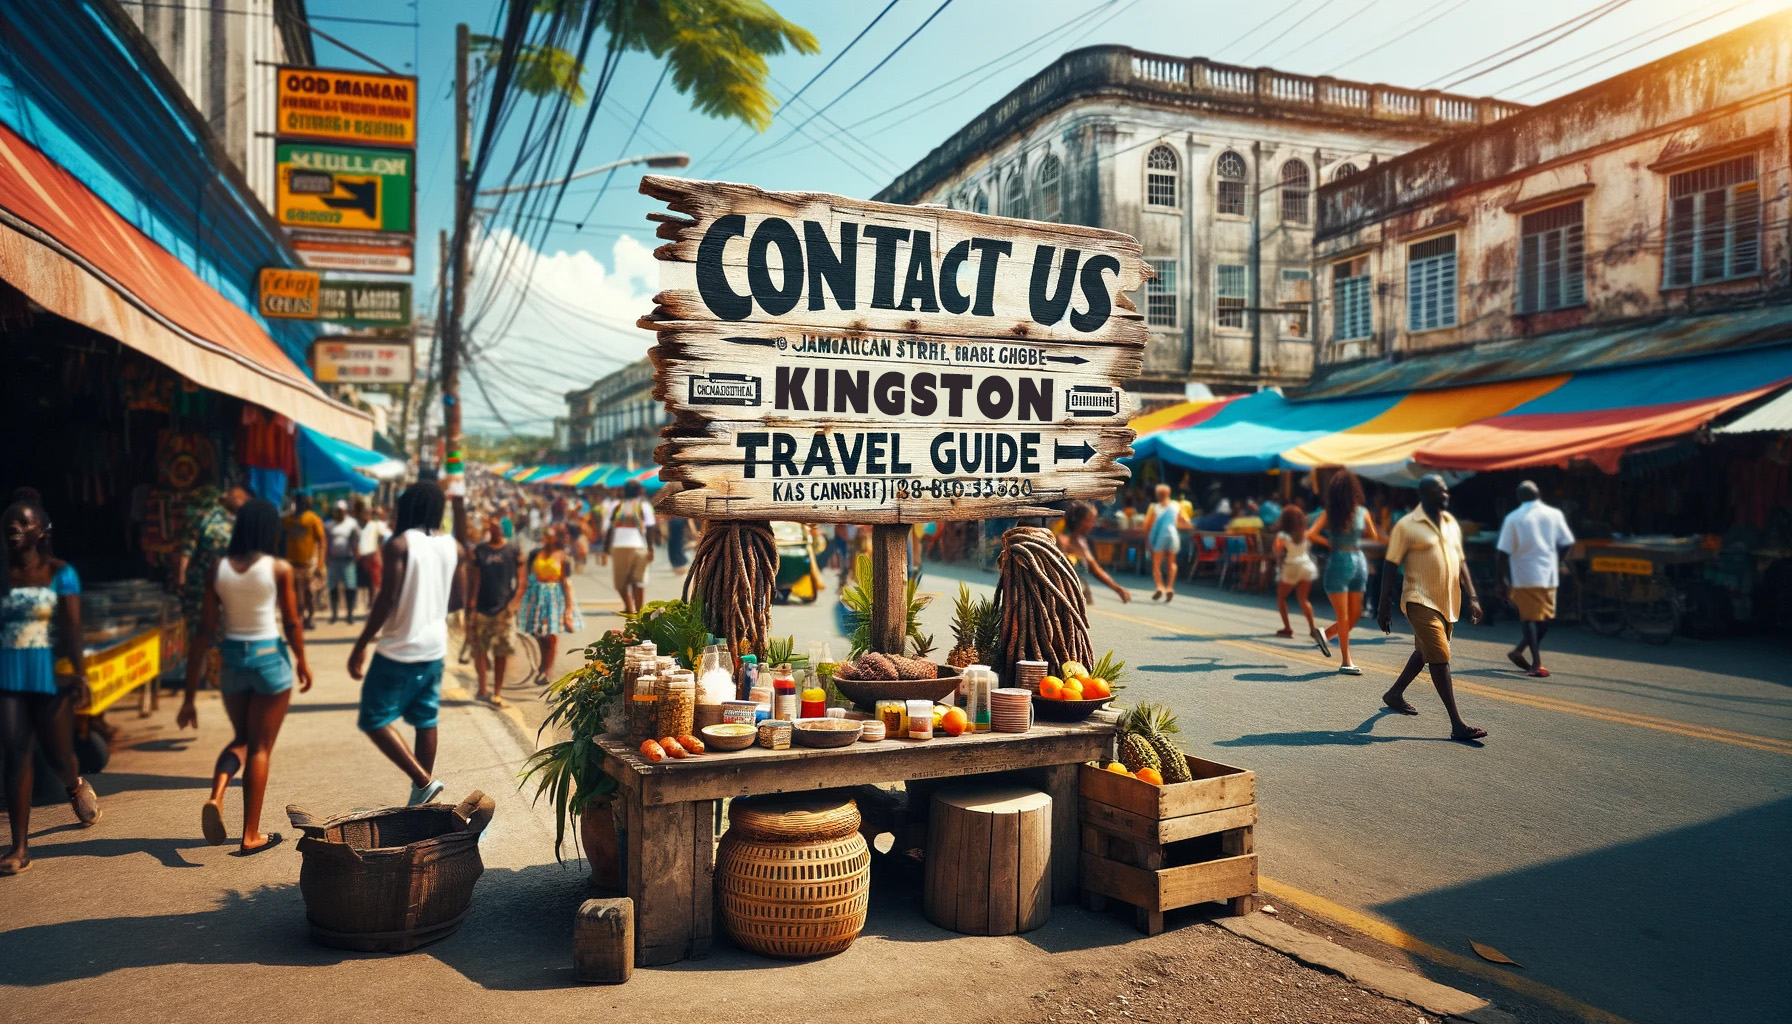 Contact Us - Kingston Travel Guide